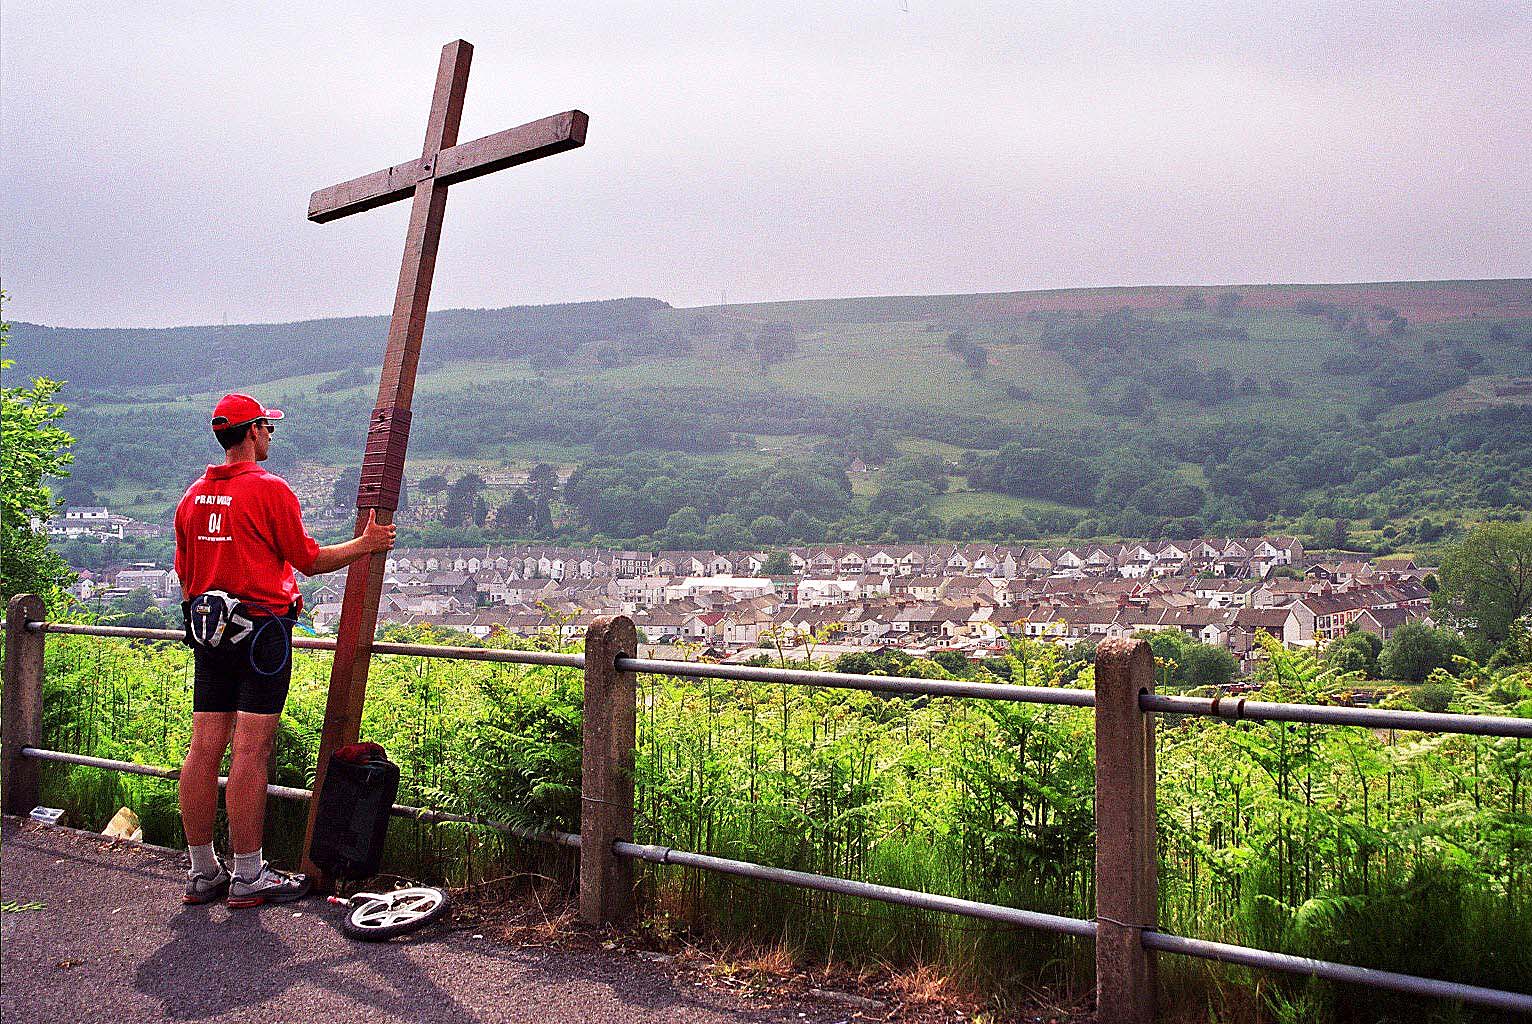 Counties evangelist Clive Cornish raises his cross above the Valleys of South Wales and prays for the villagers. A guided pilgrim walk in wales